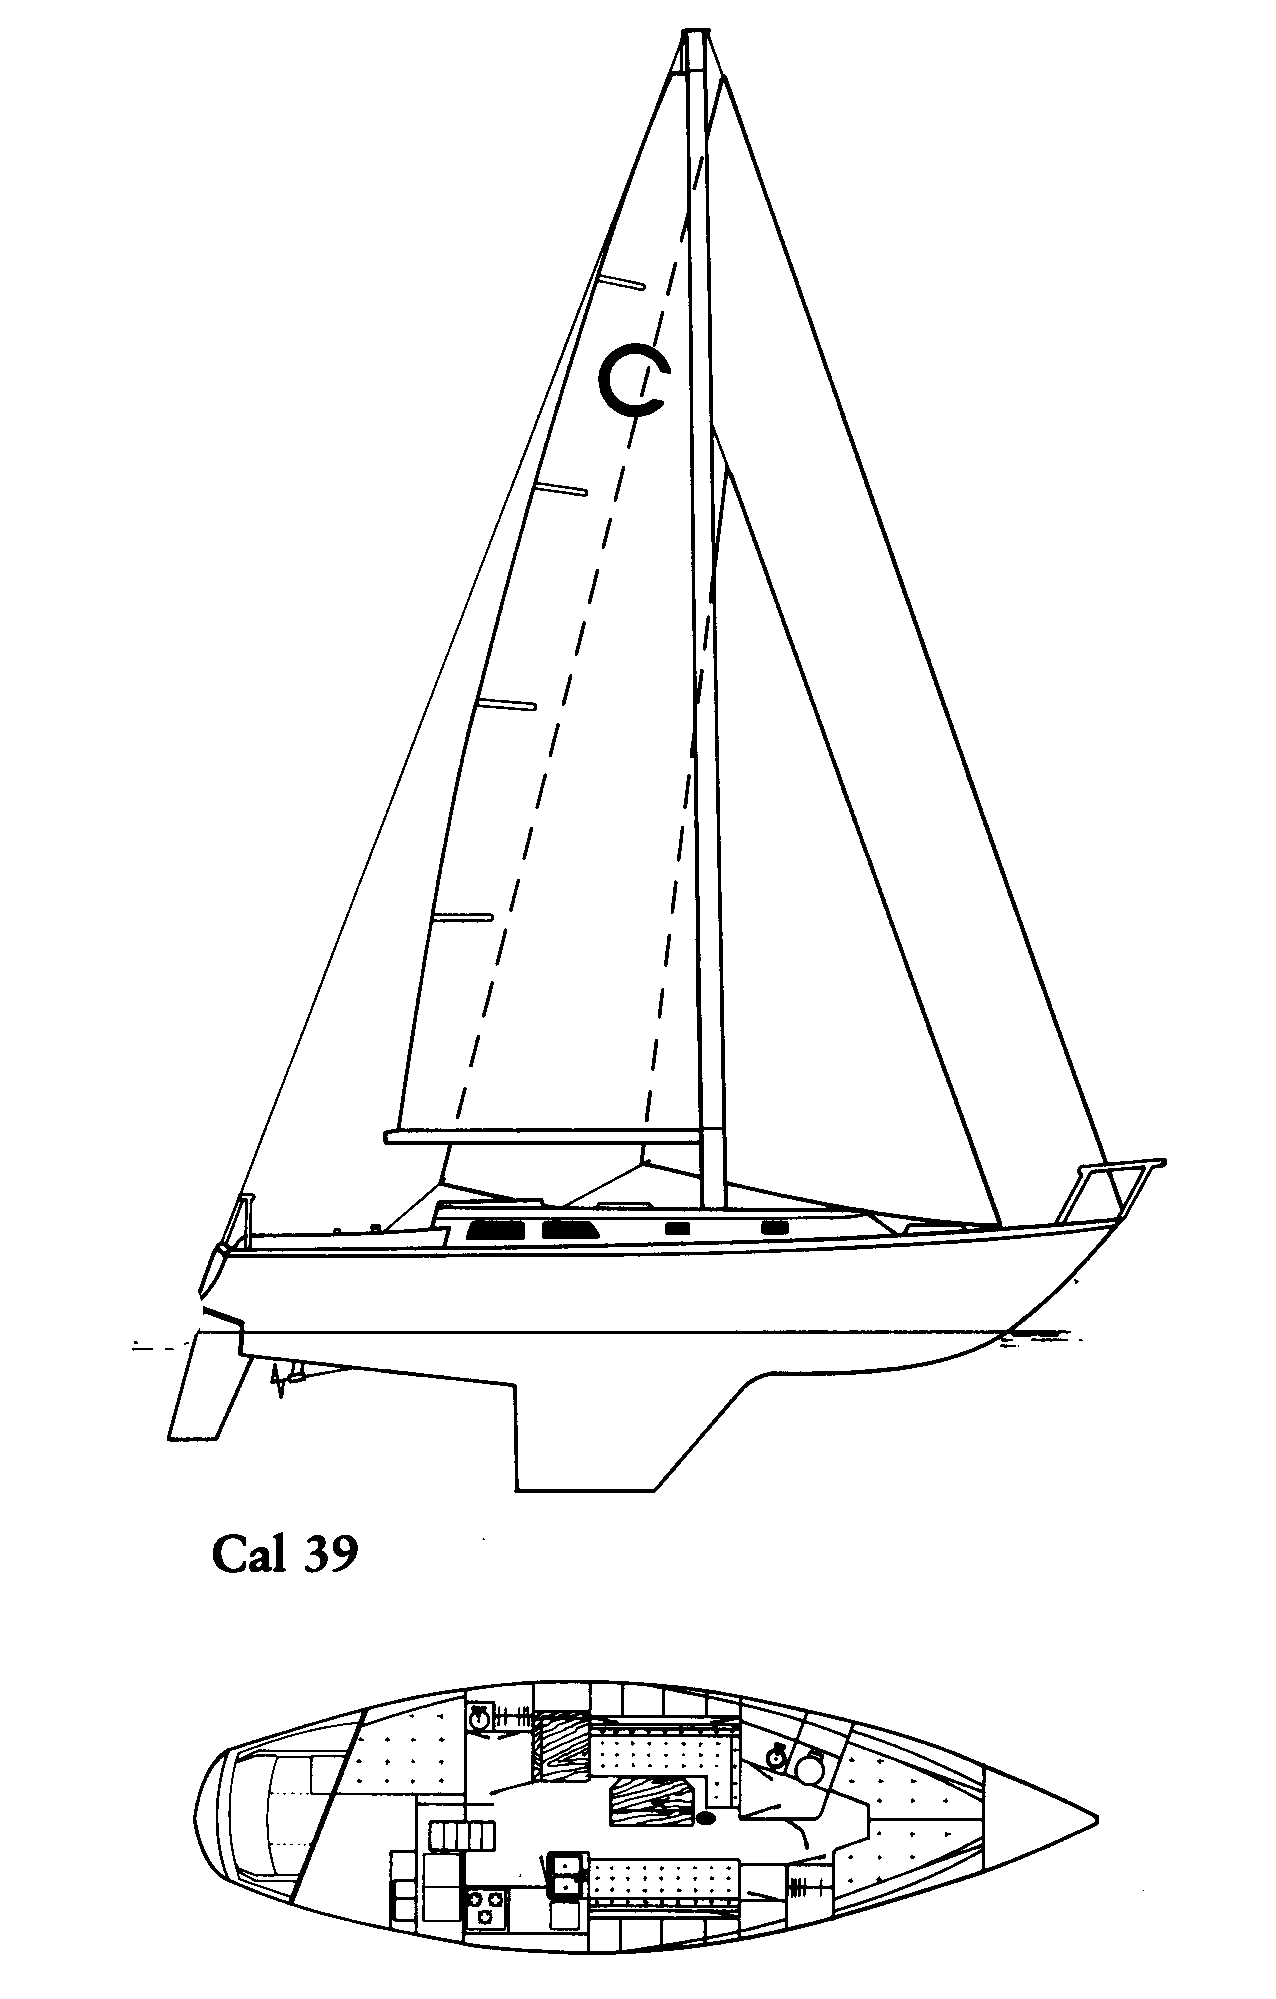 Line drawing of a Cal 39